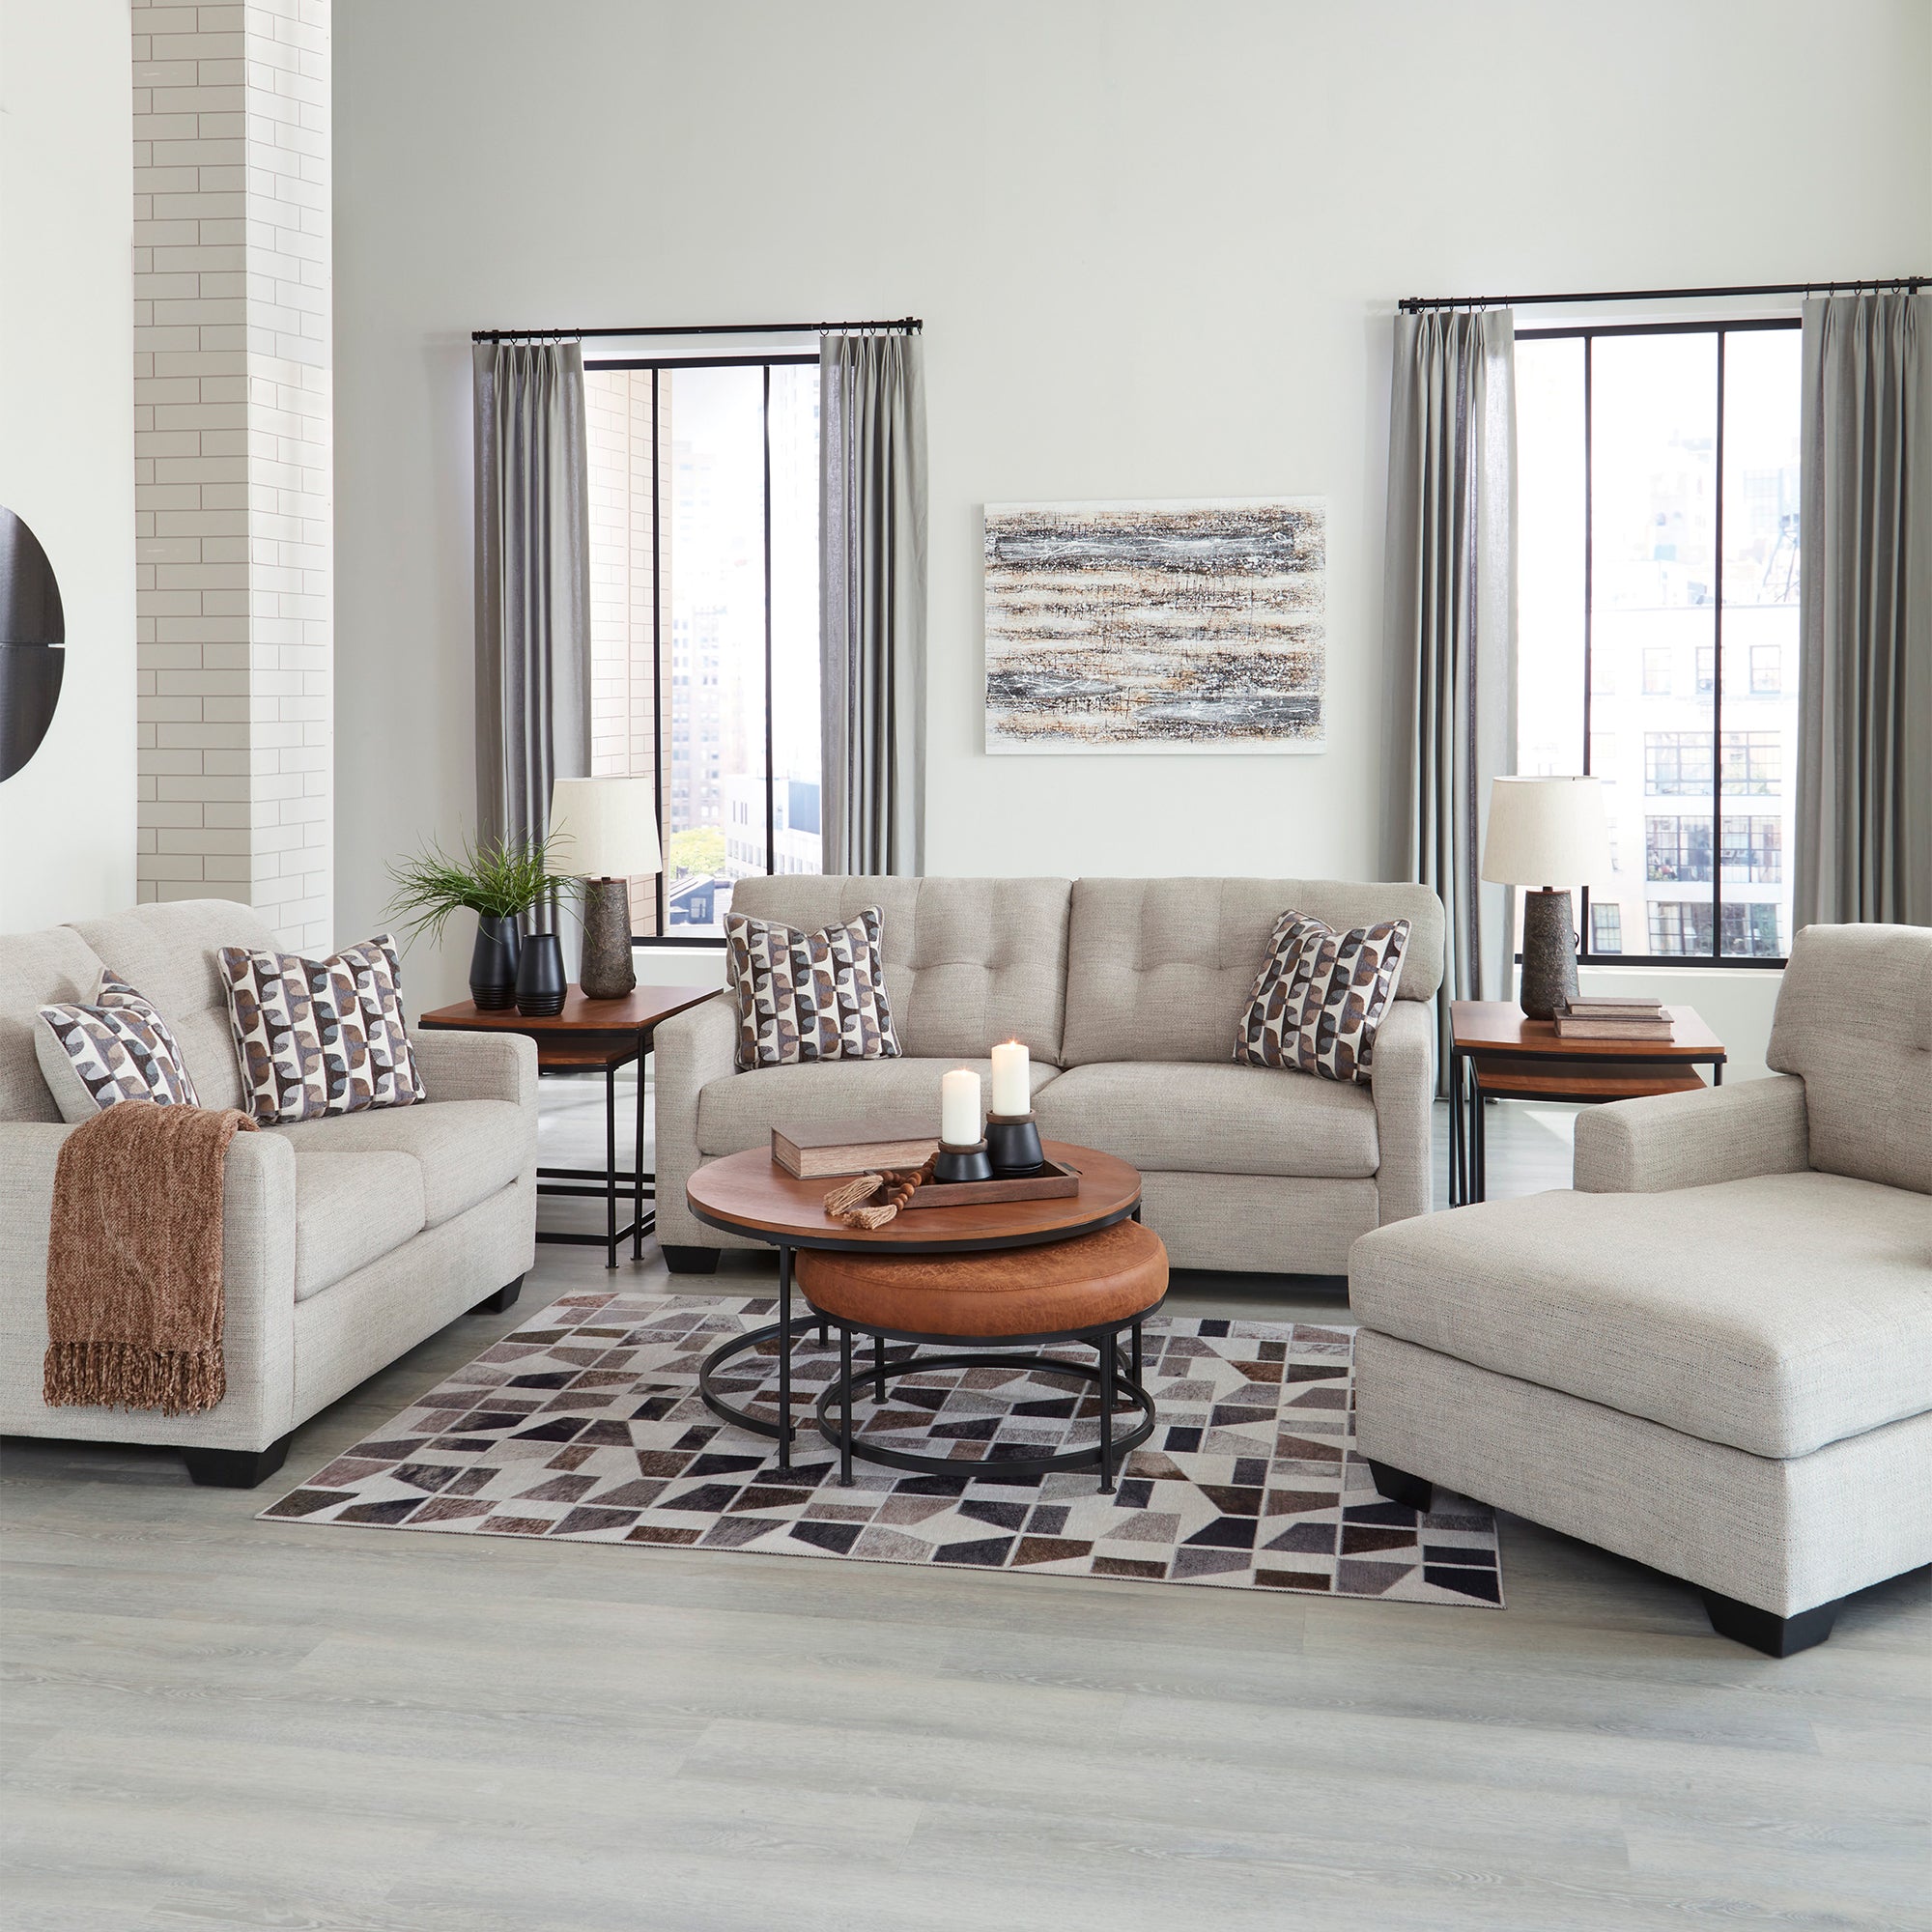 Mahoney Sofa and Loveseat combo in pebble shade, combining durability and design for Milwaukee homes